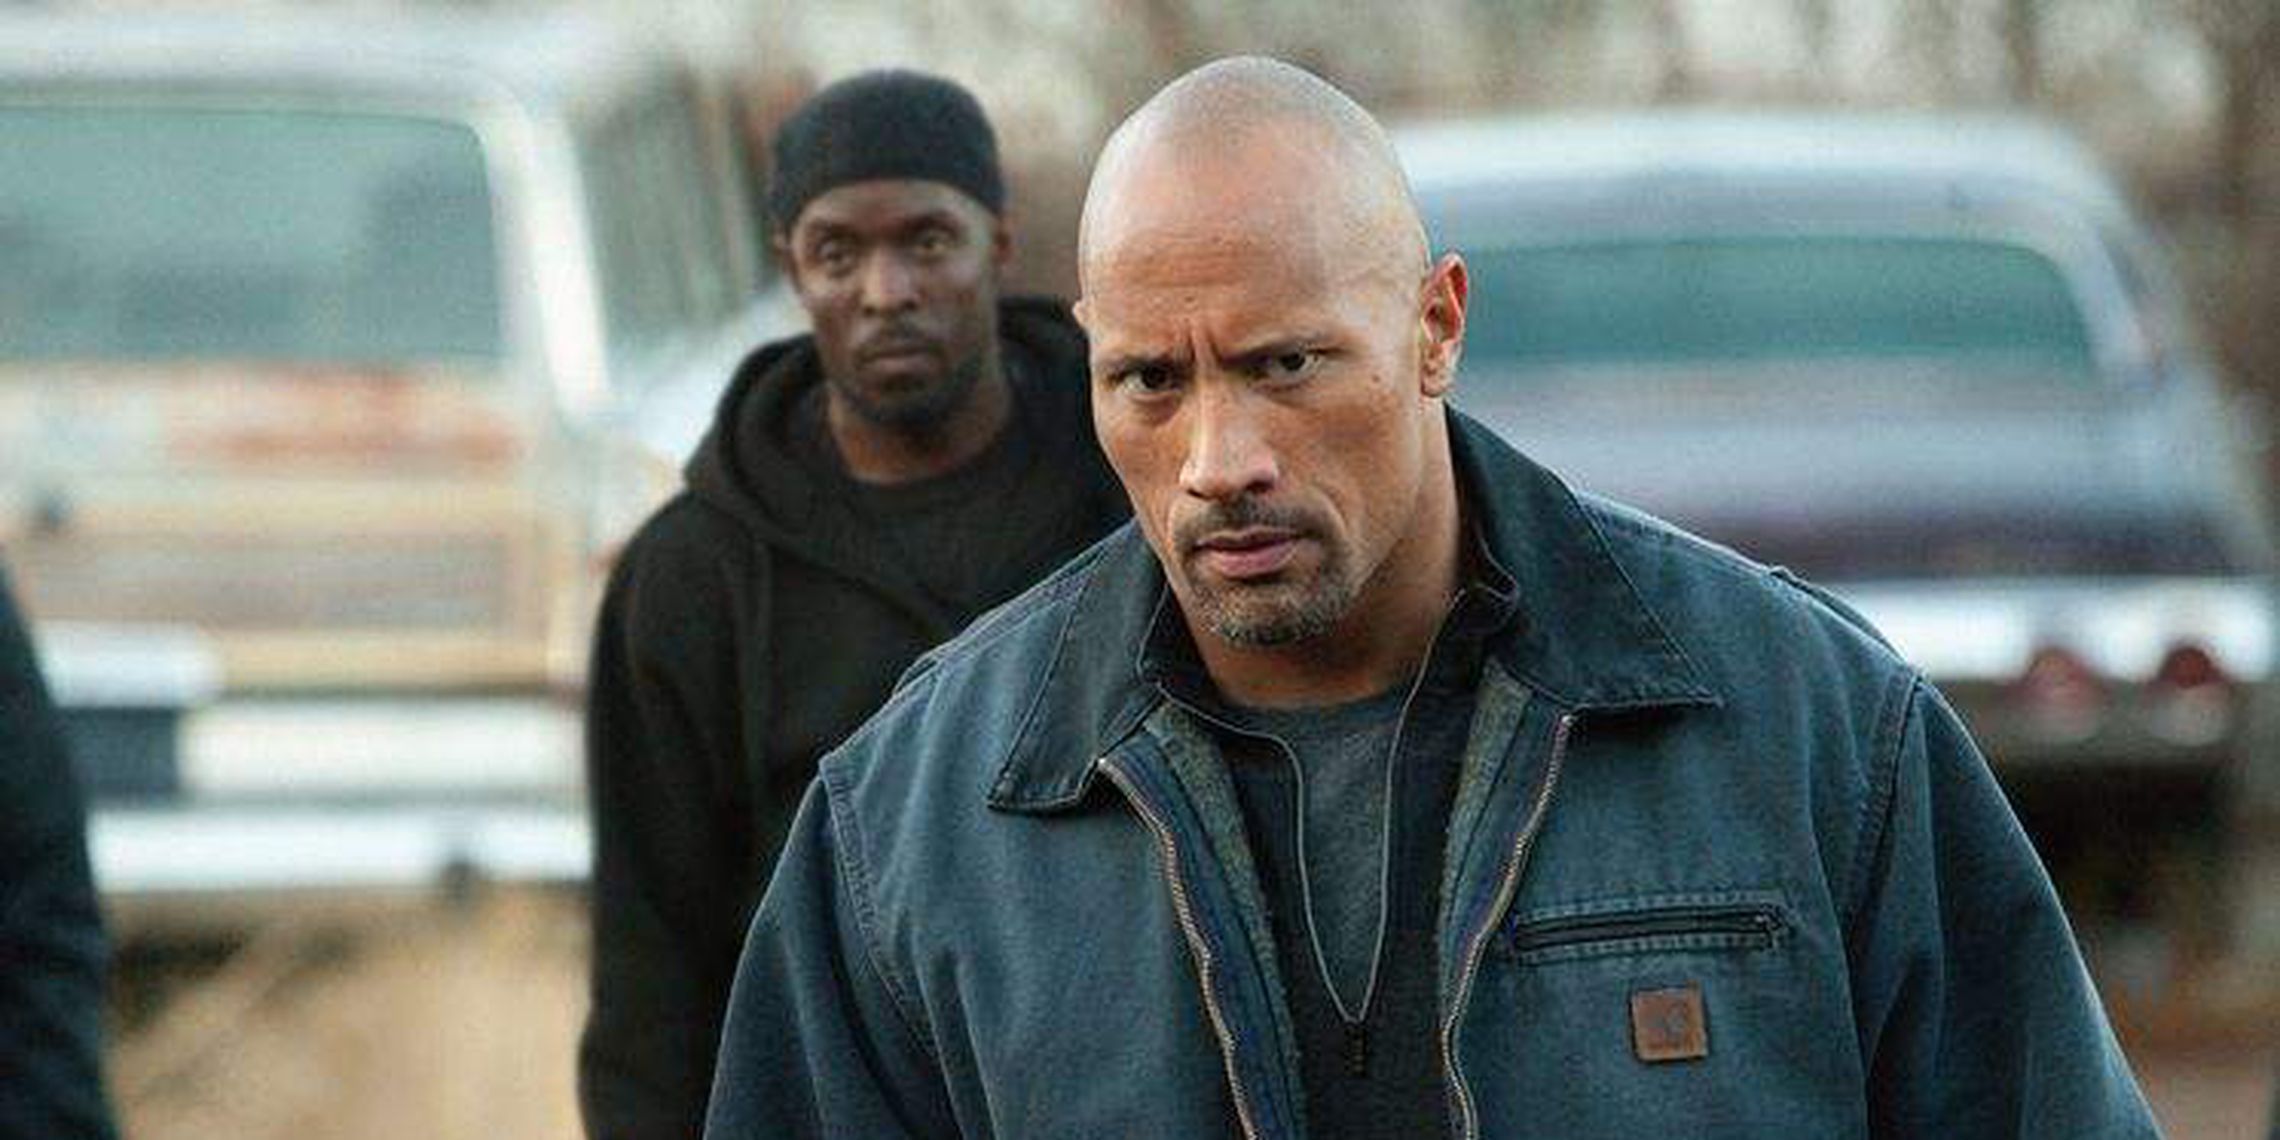 Dwayne Johnson looks angry in Snitch